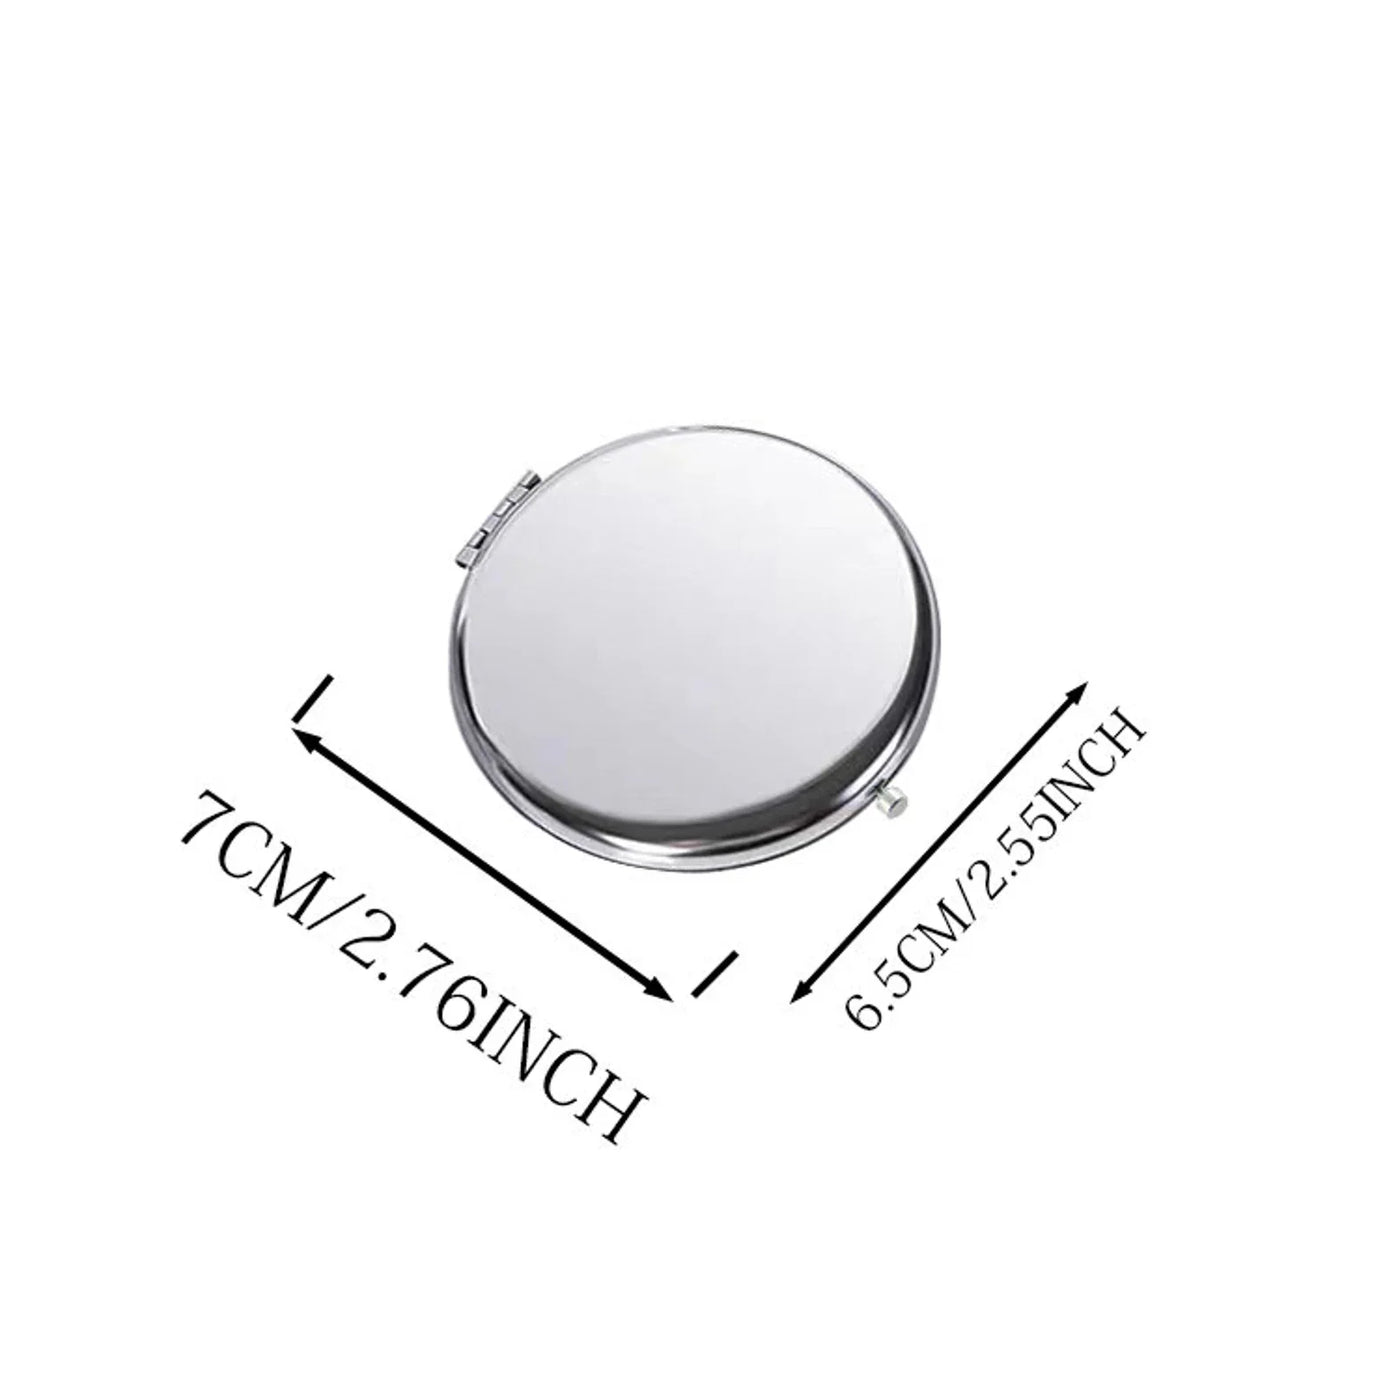 Elegant Custom Compact Mirror - Engravable with Names and Special Dates,Perfect Wedding Favor for Guests, Ideal for Bridal Parties